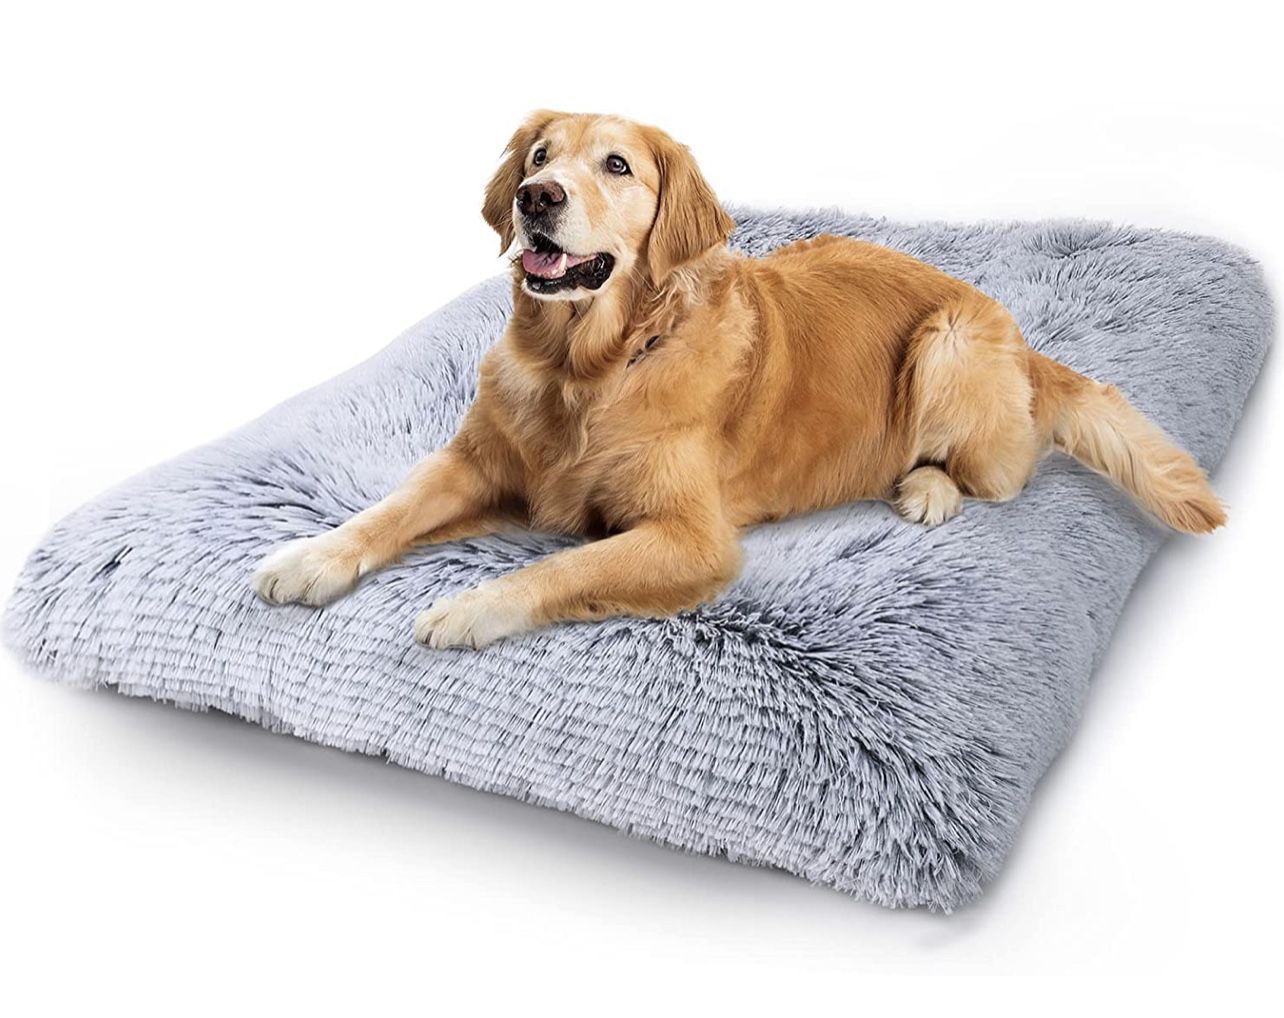 Vonabem Dog Bed Crate Pad, Deluxe Plush Soft Pet Beds, Washable Anti-Slip Dog Crate Bed for Large Medium Small Dogs and Cats,Dog Mats for Sleeping and